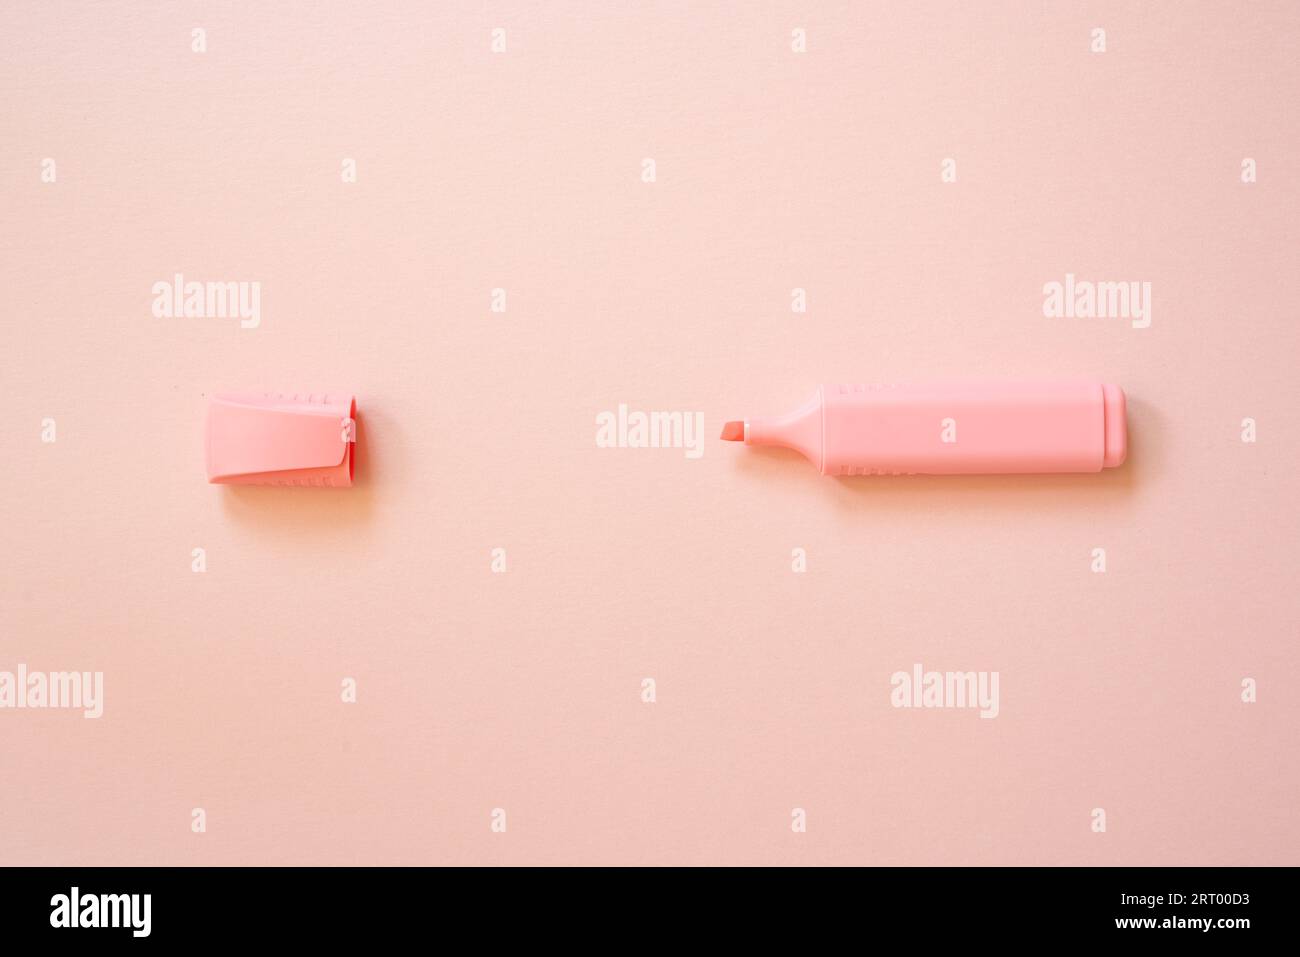 Highlighter pen isolated on pink background. top view, copy space Stock Photo